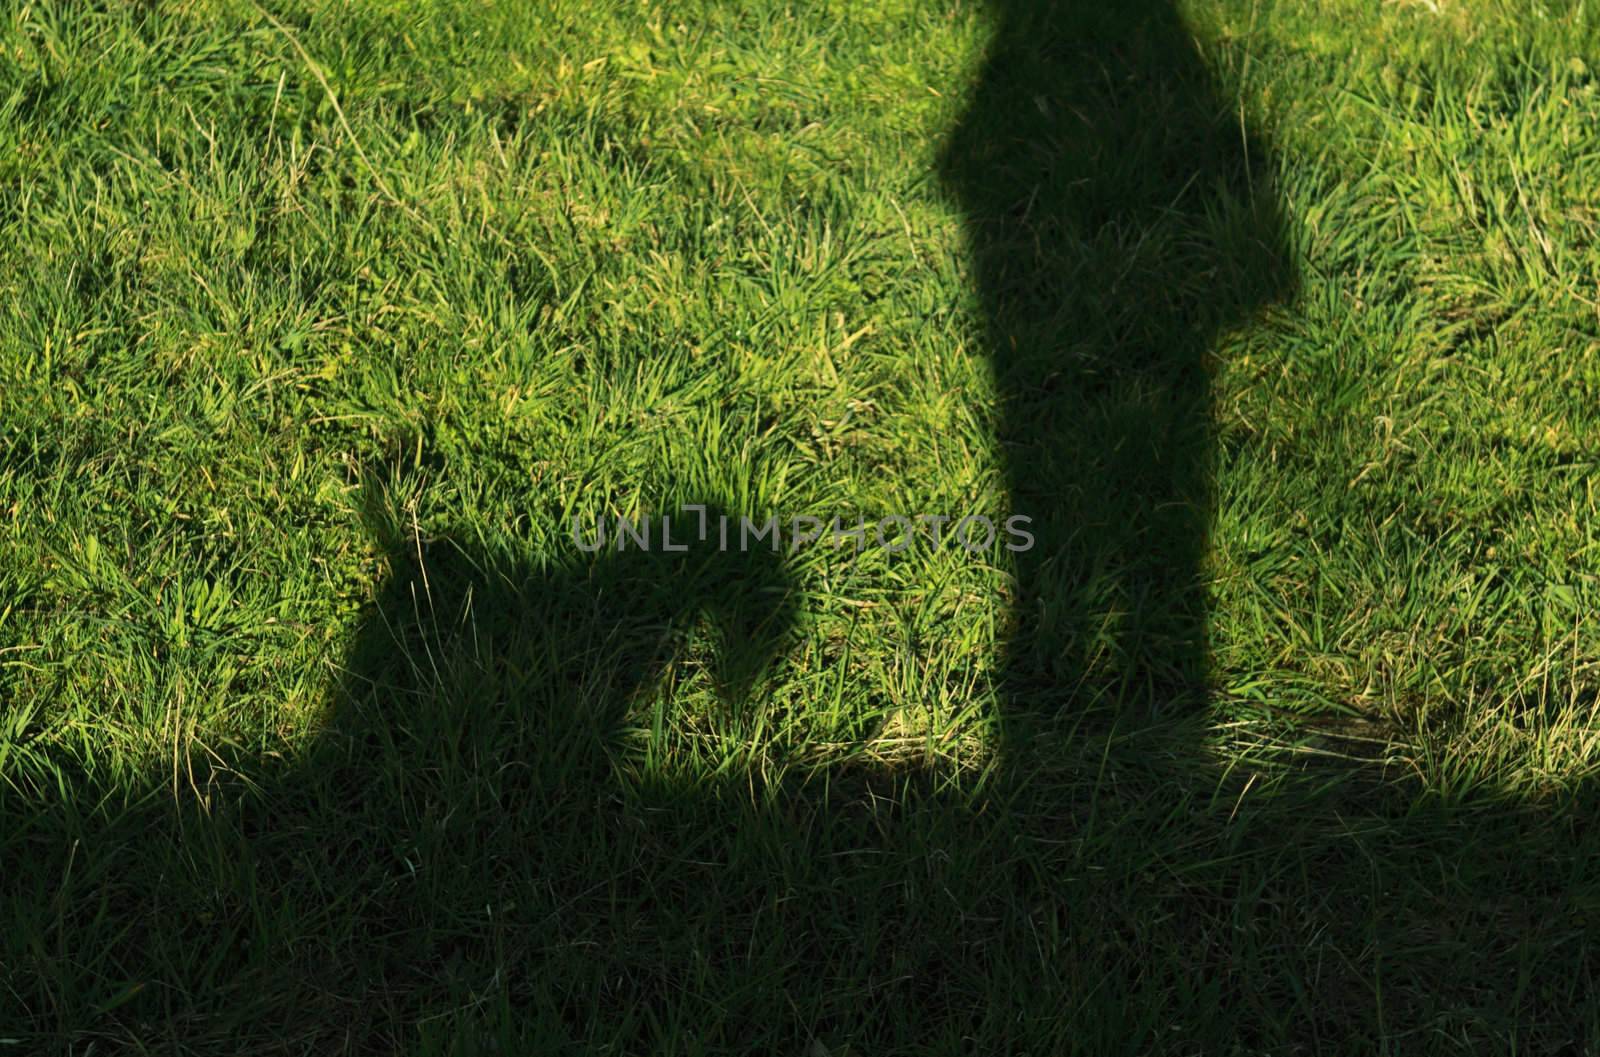 shadows on the grass